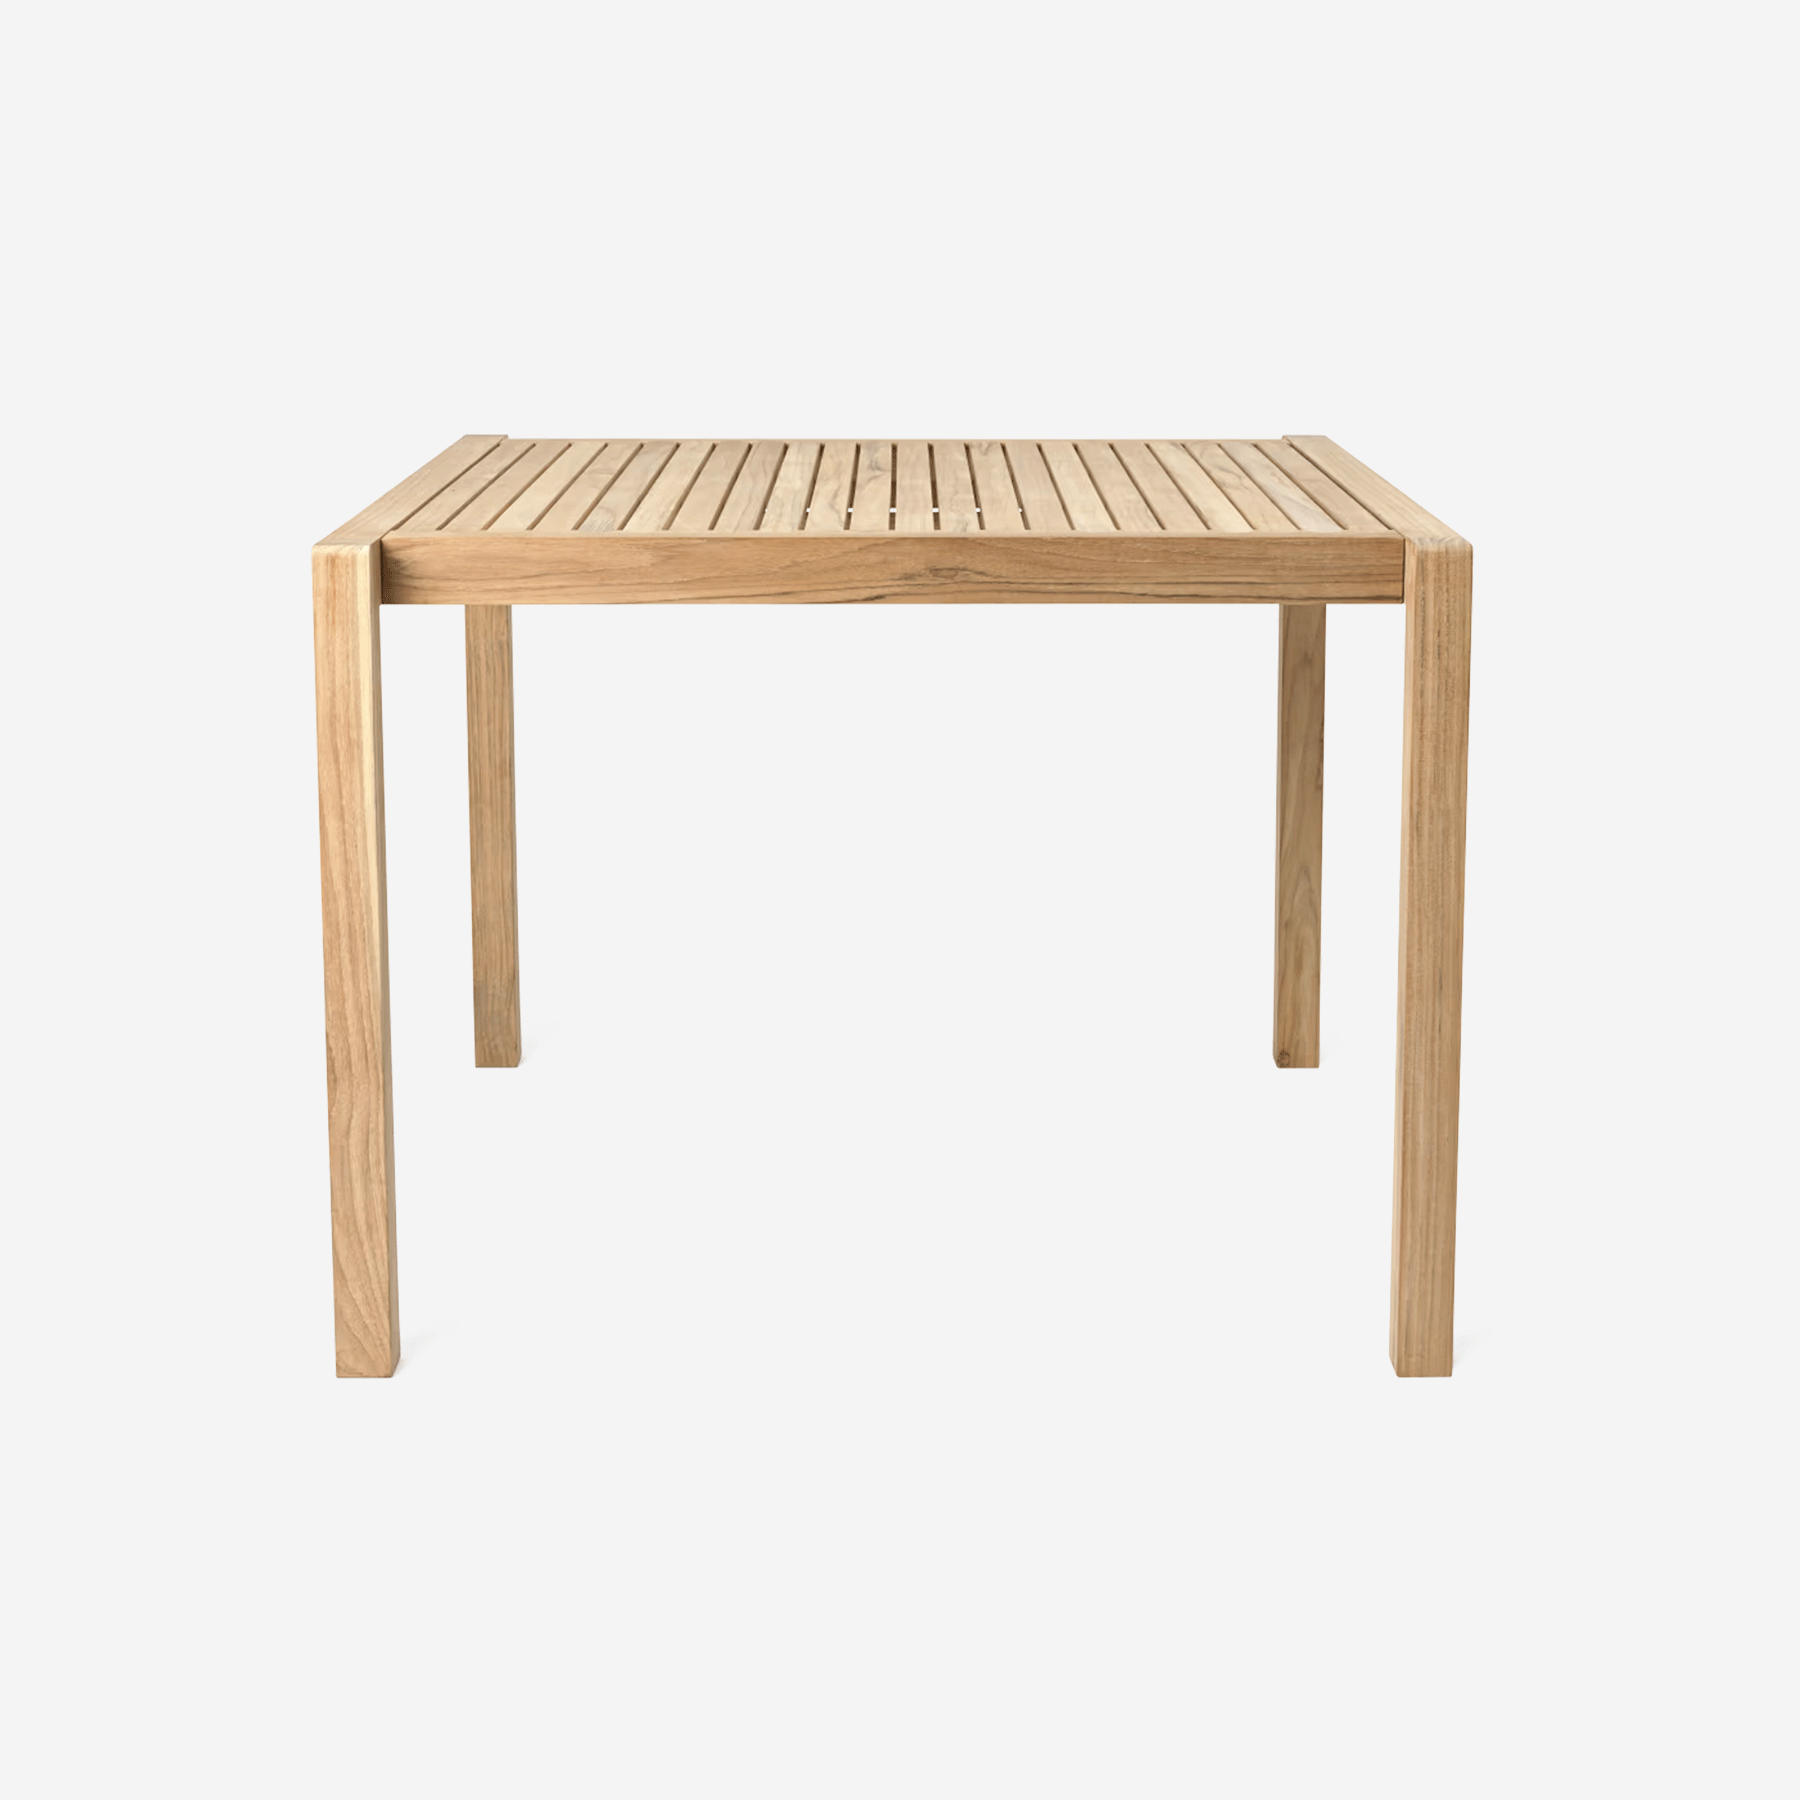 AH902 Outdoor Dining Table, Square